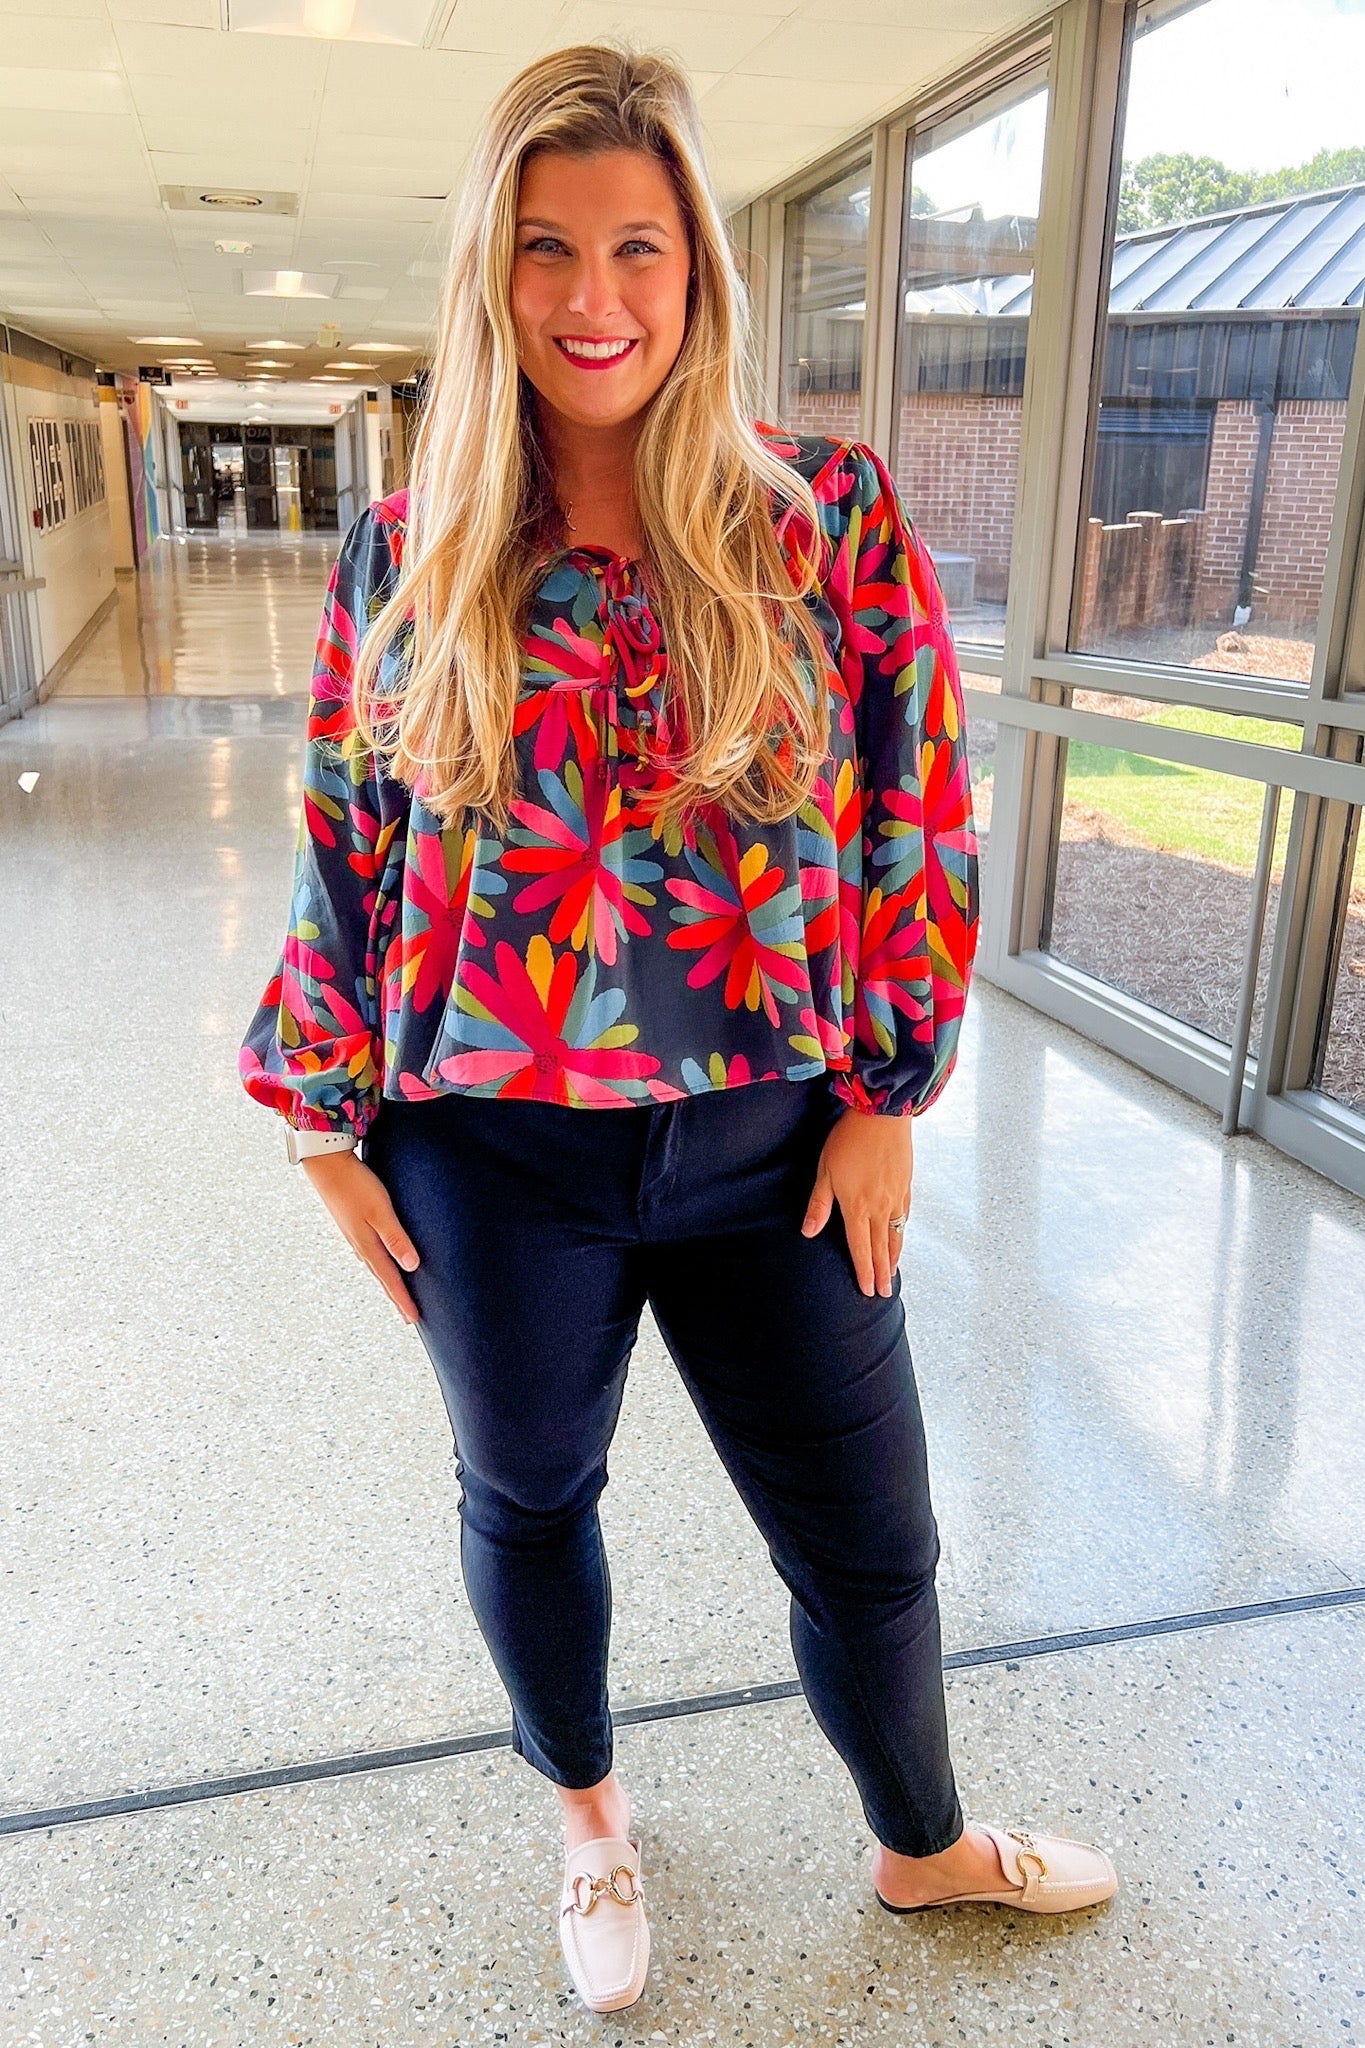 The Vivey Full Bloom Peasant Top by Michelle McDowell